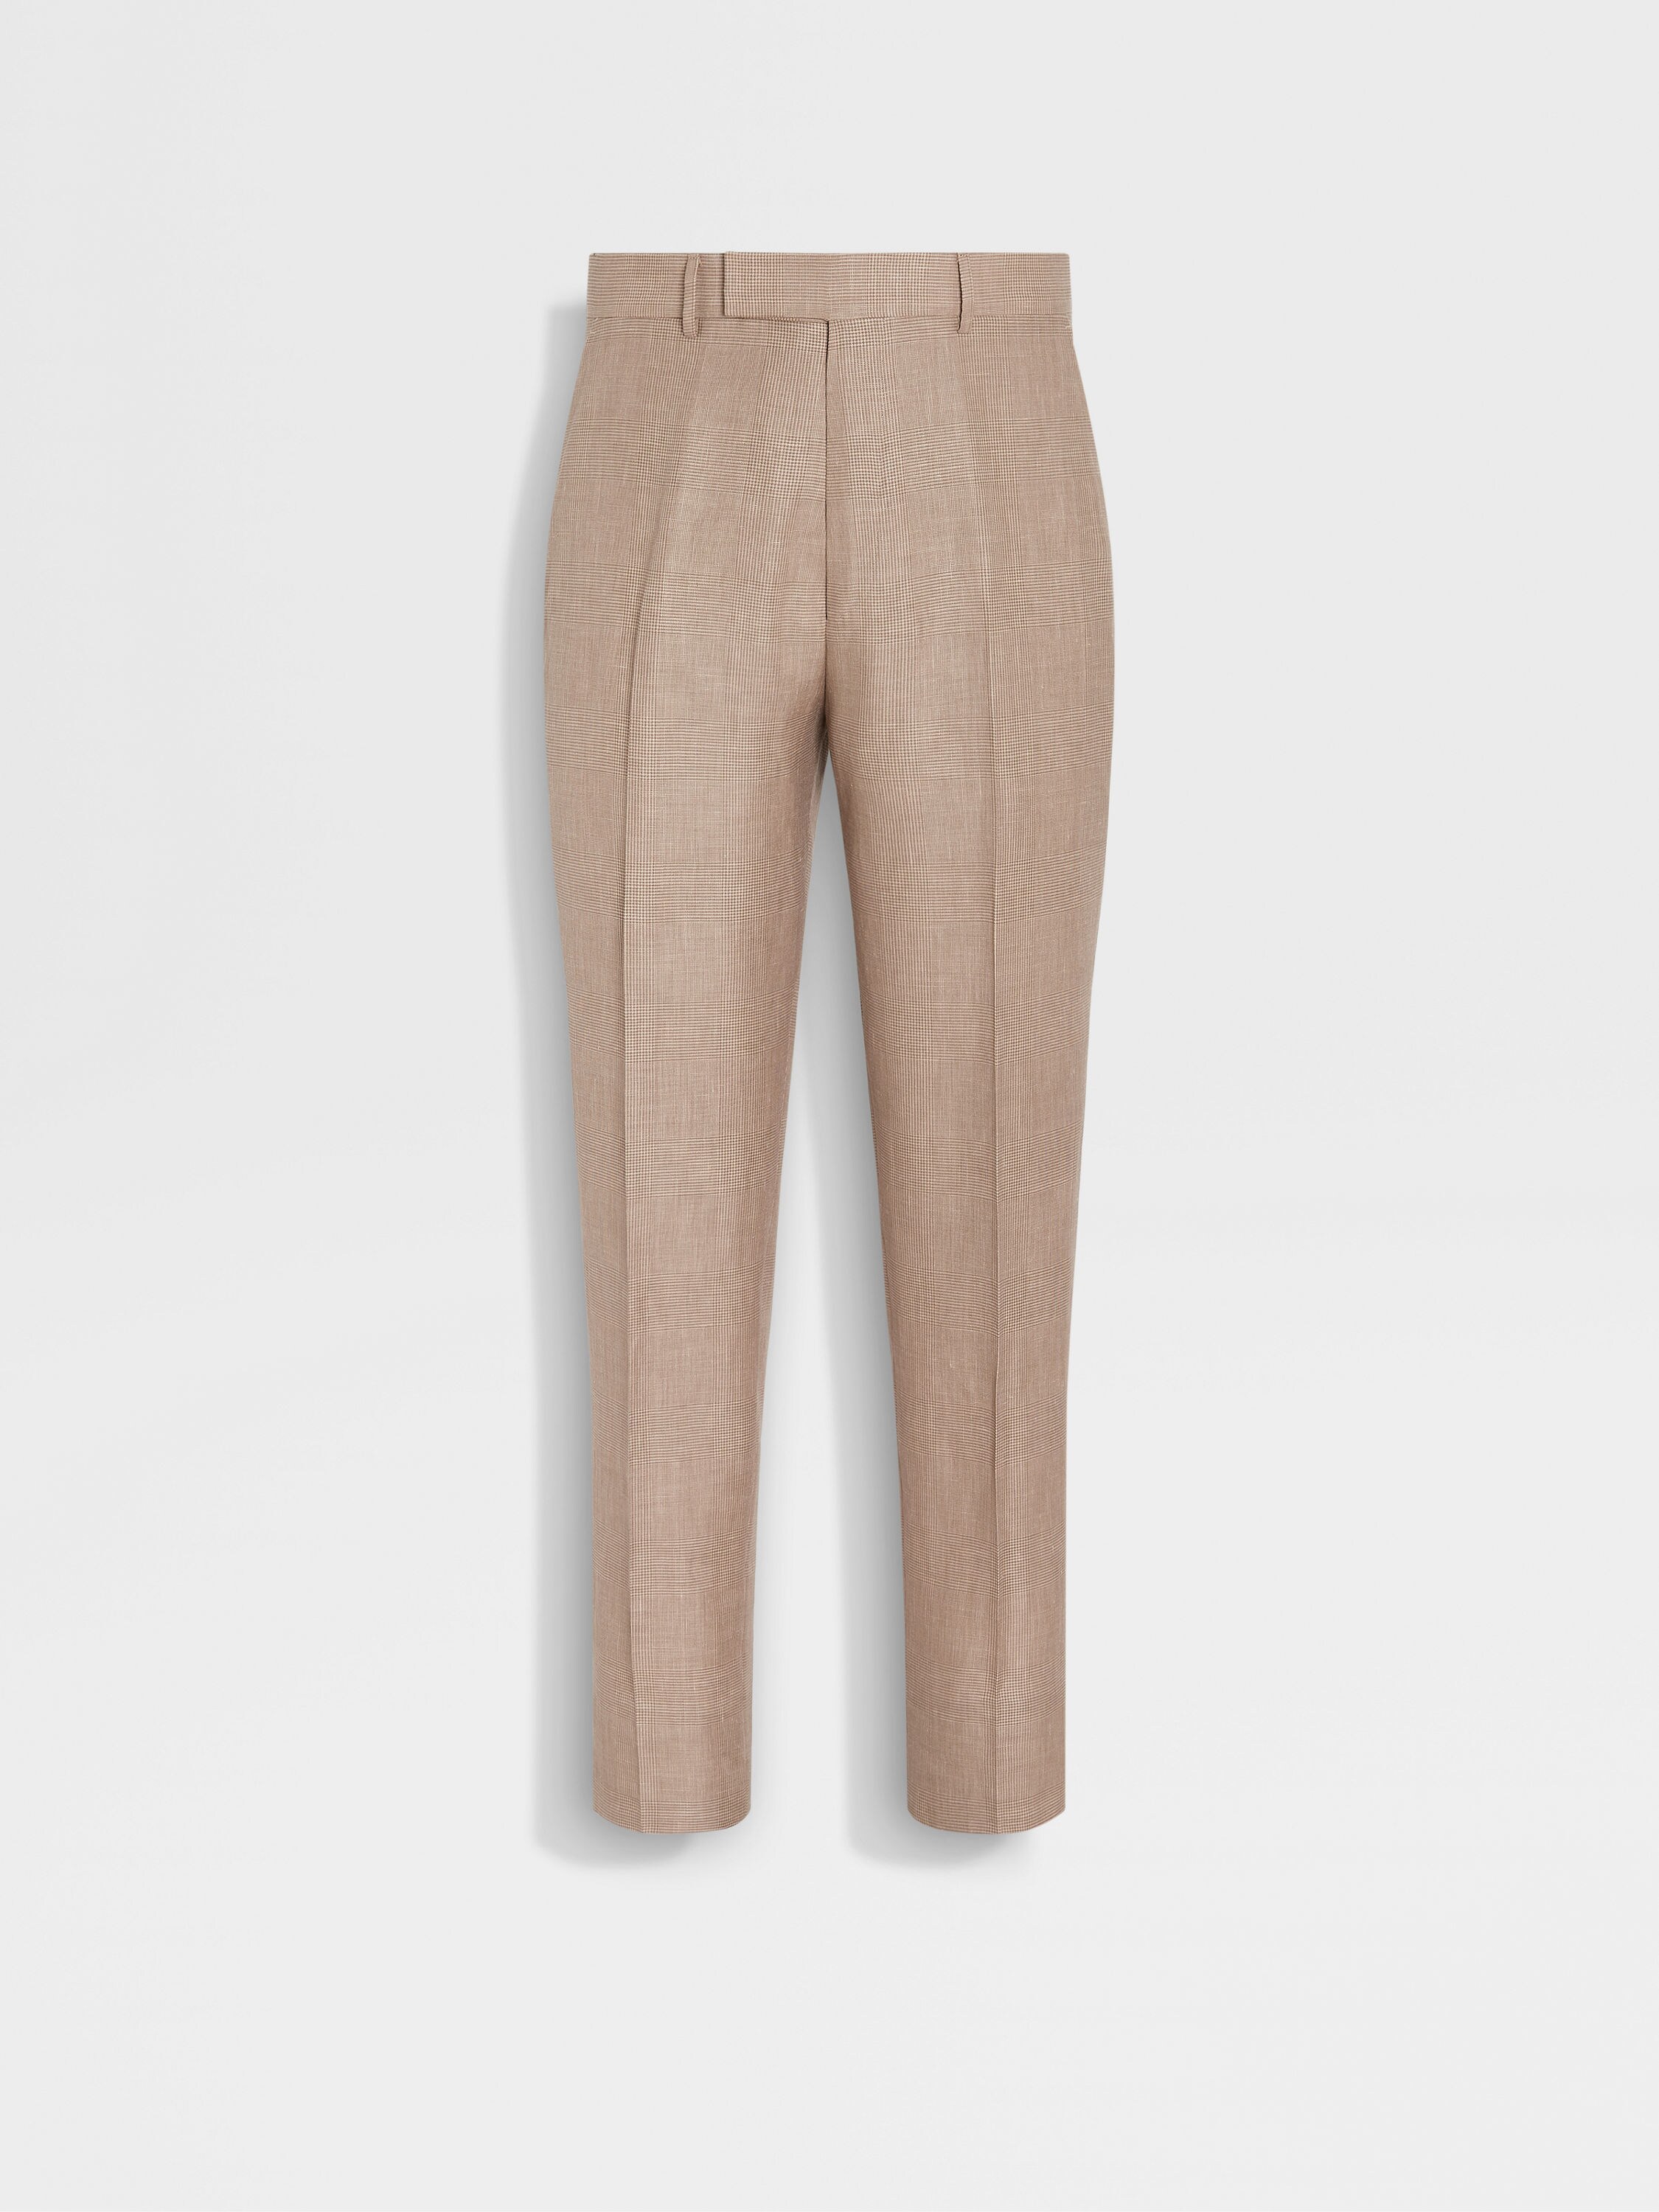 Light Beige and Beige Crossover Wool Blend Pants